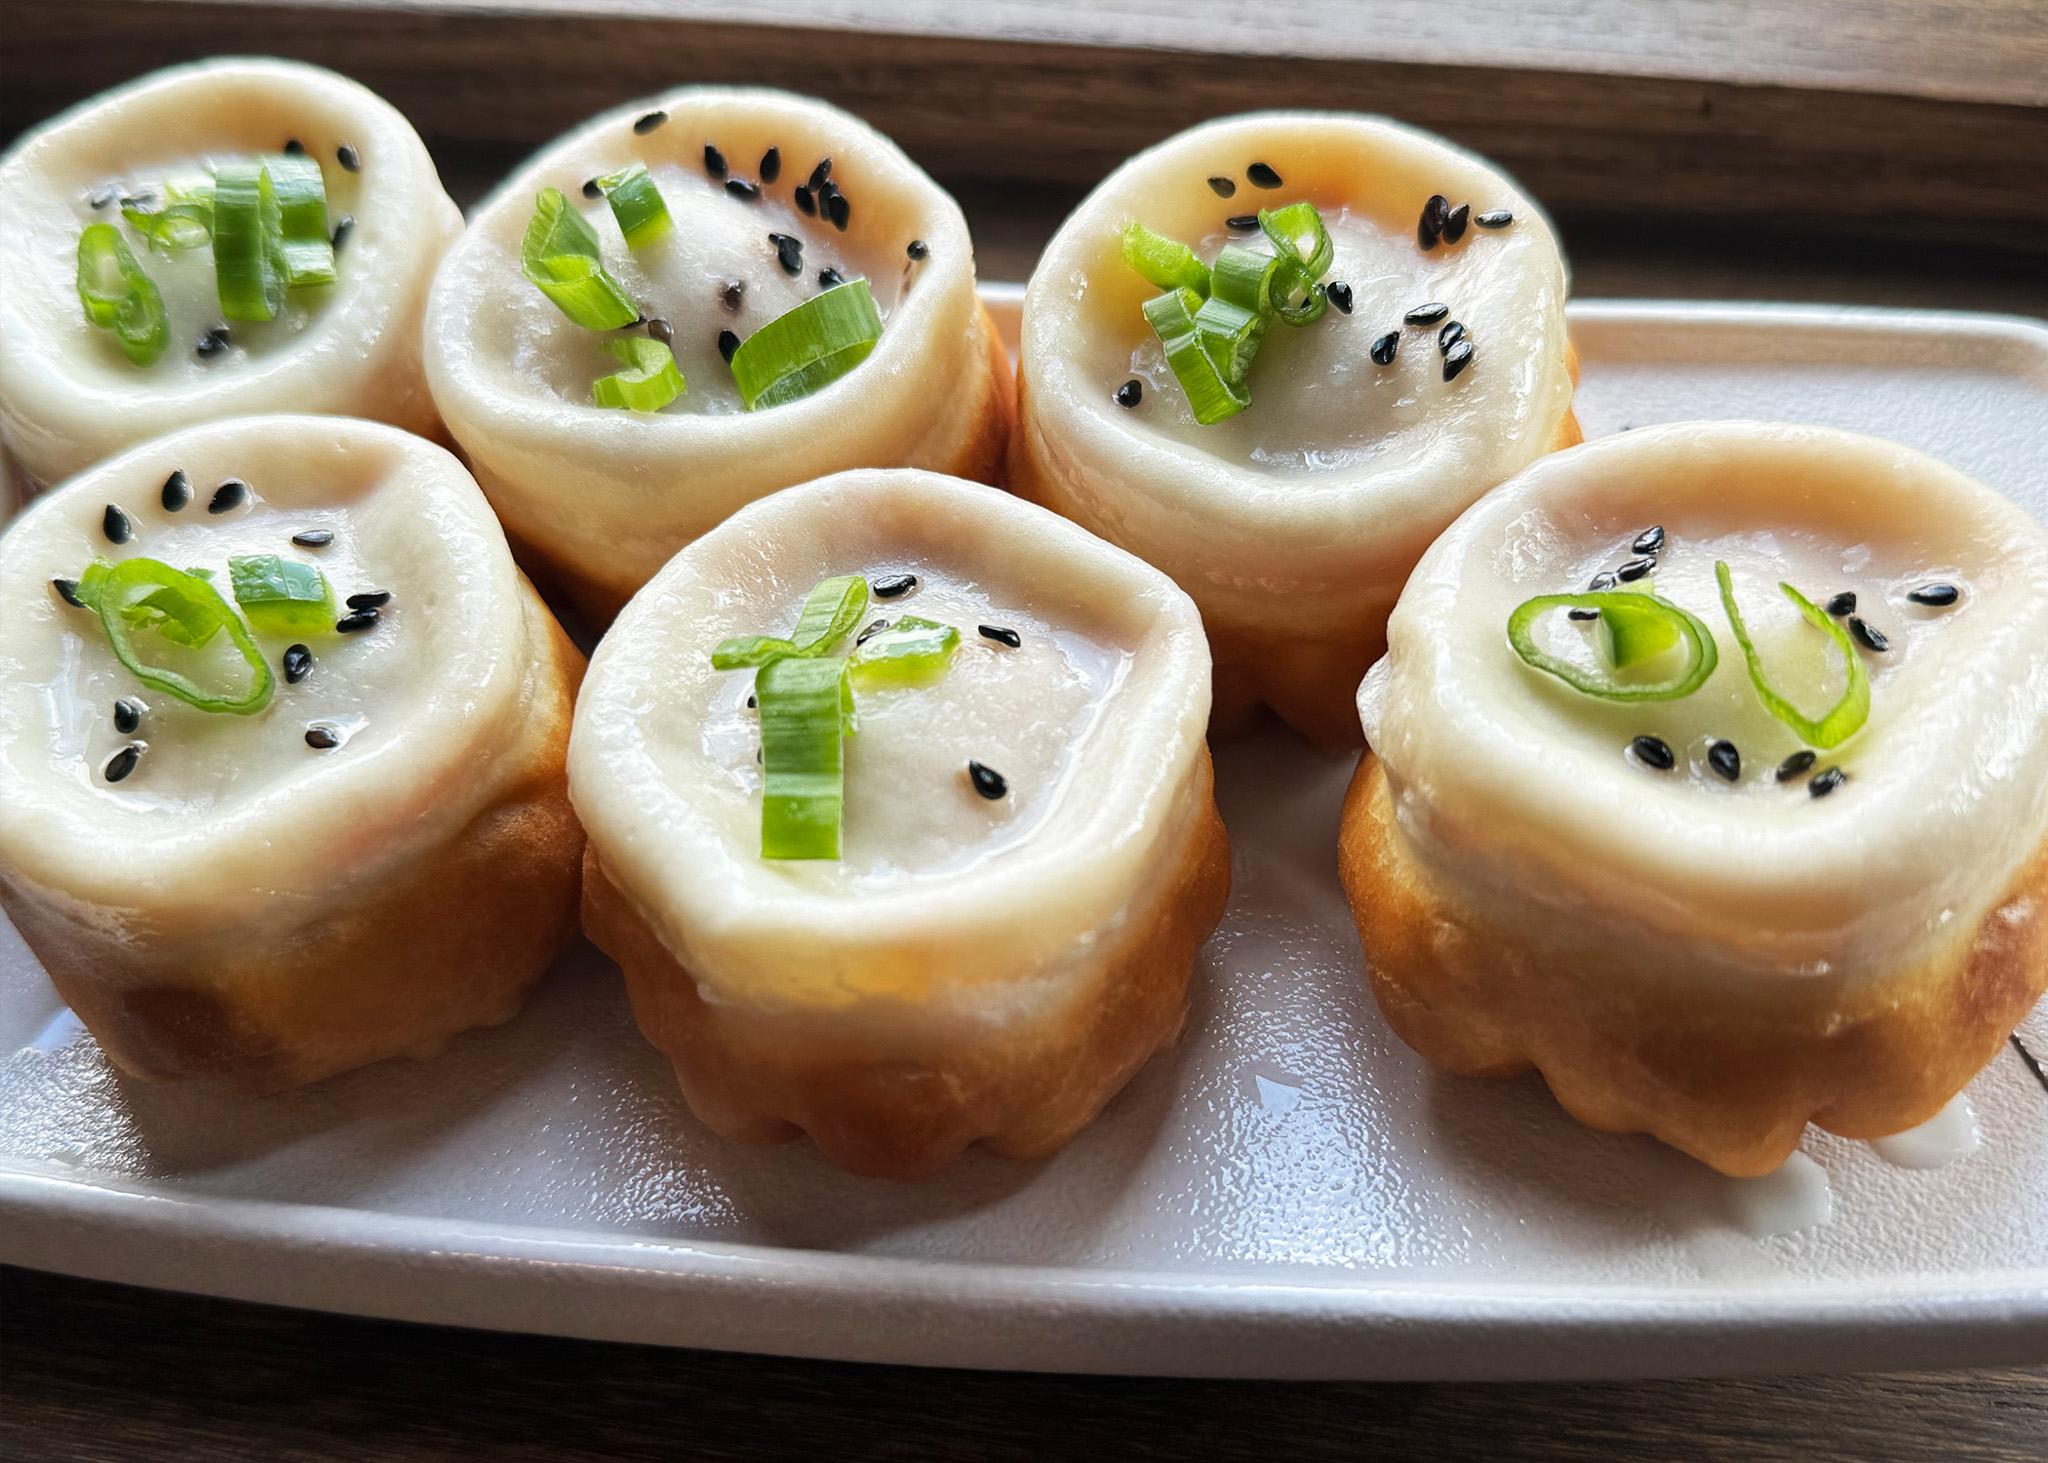 Six round, translucent dumplings topped with green onions and black sesame seeds on a plate.